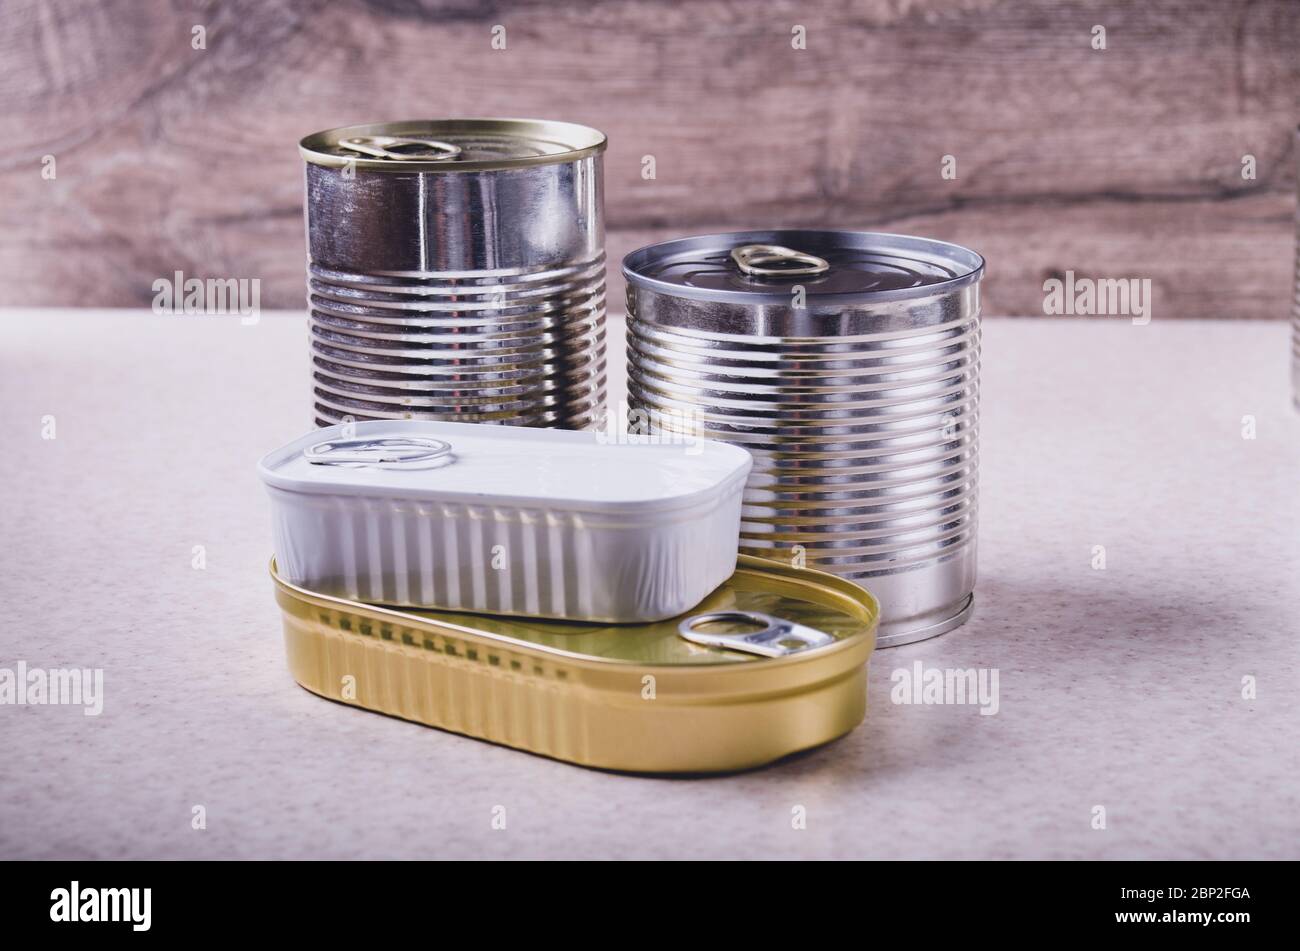 Set of various canned foods in tin cans on kitchen table, non-perishable, long shelf life food for survival in emergency conditions concept Stock Photo